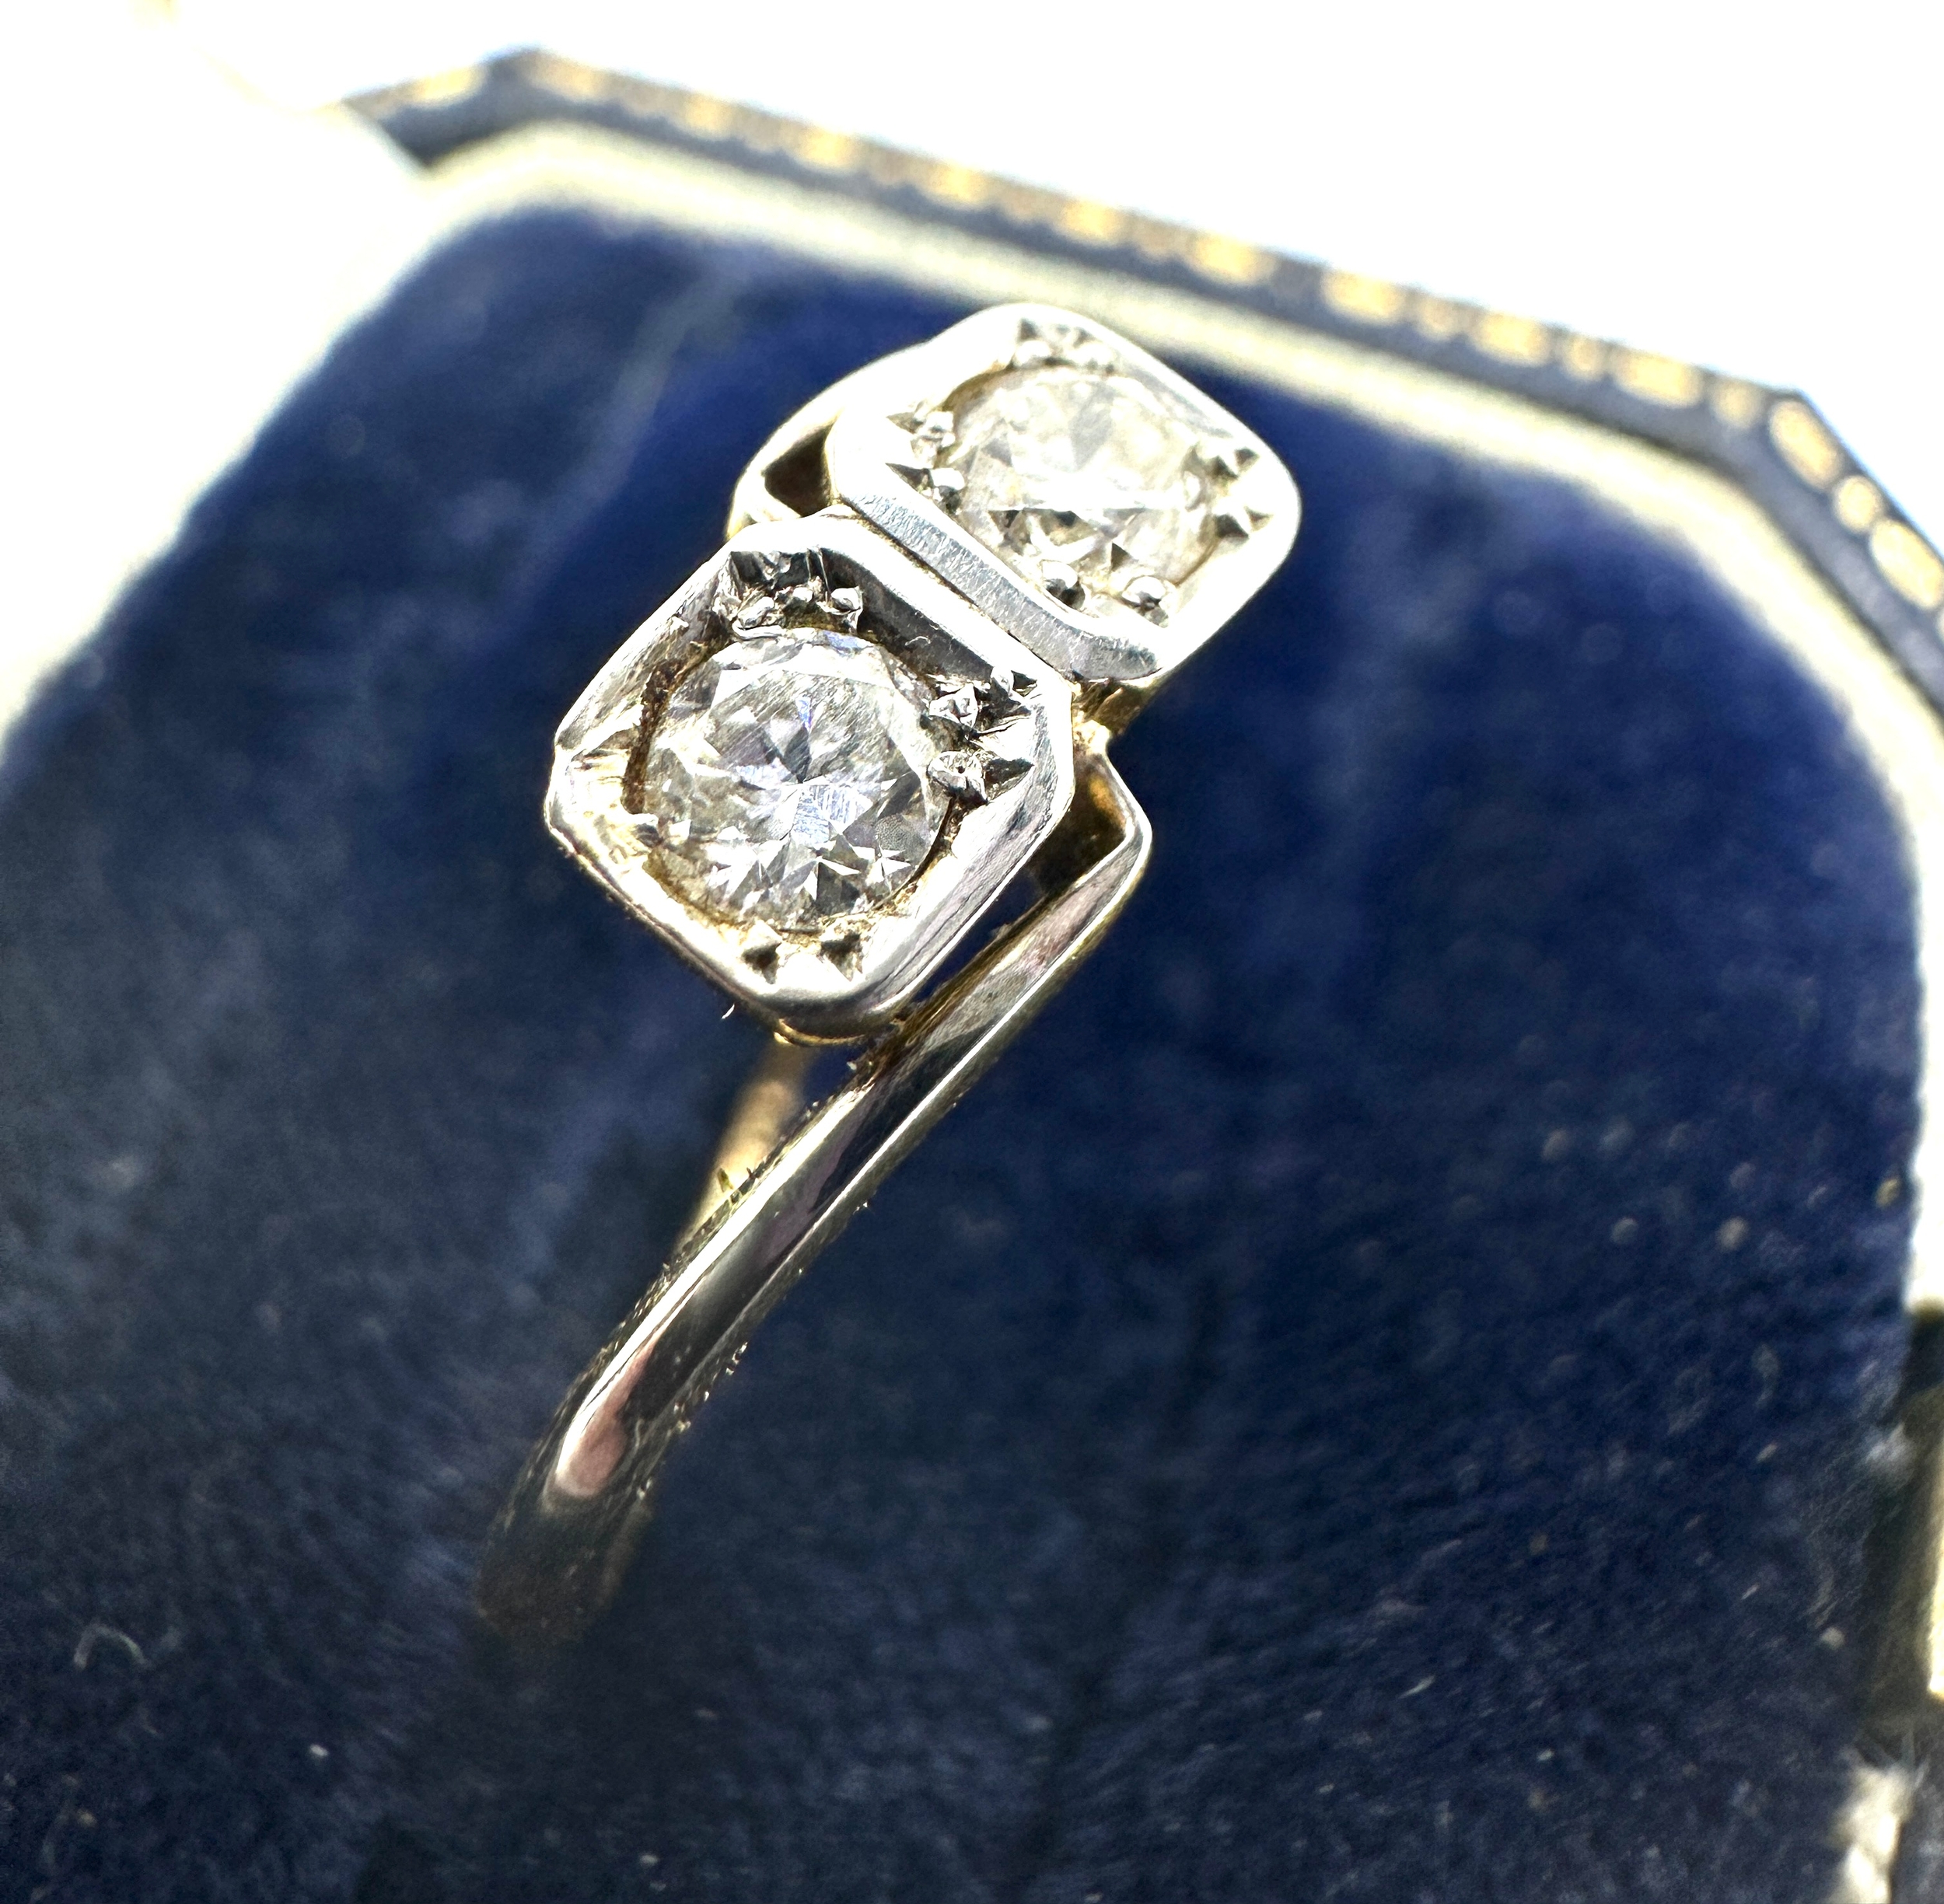 18ct gold diamond ring set with 2 diamonds each measure approx 4mm est 0.40ct weight 2.6g - Image 2 of 4